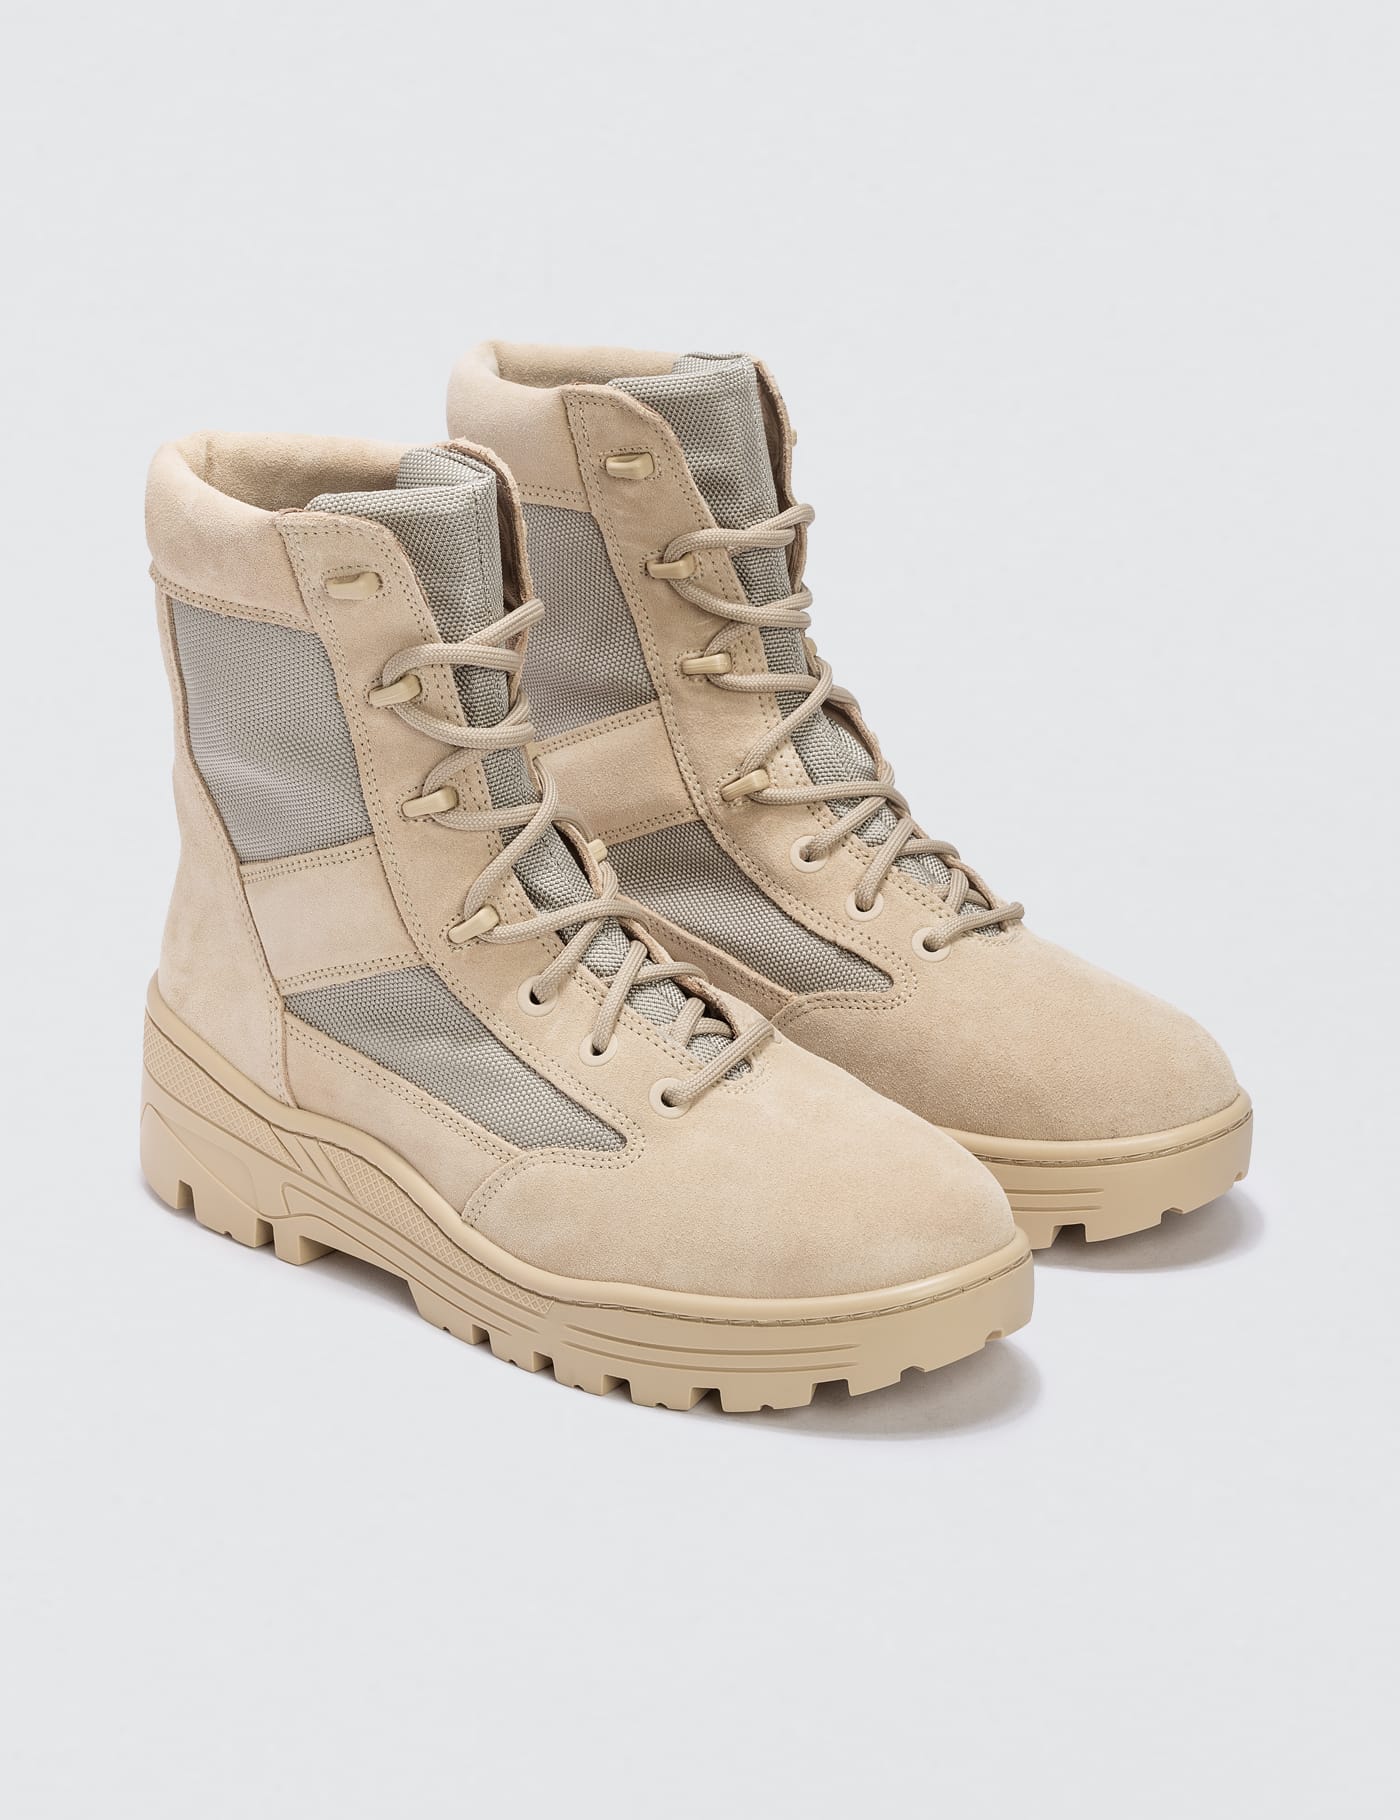 YEEZY Season 4 - Combat Boot | HBX - Globally Curated Fashion and